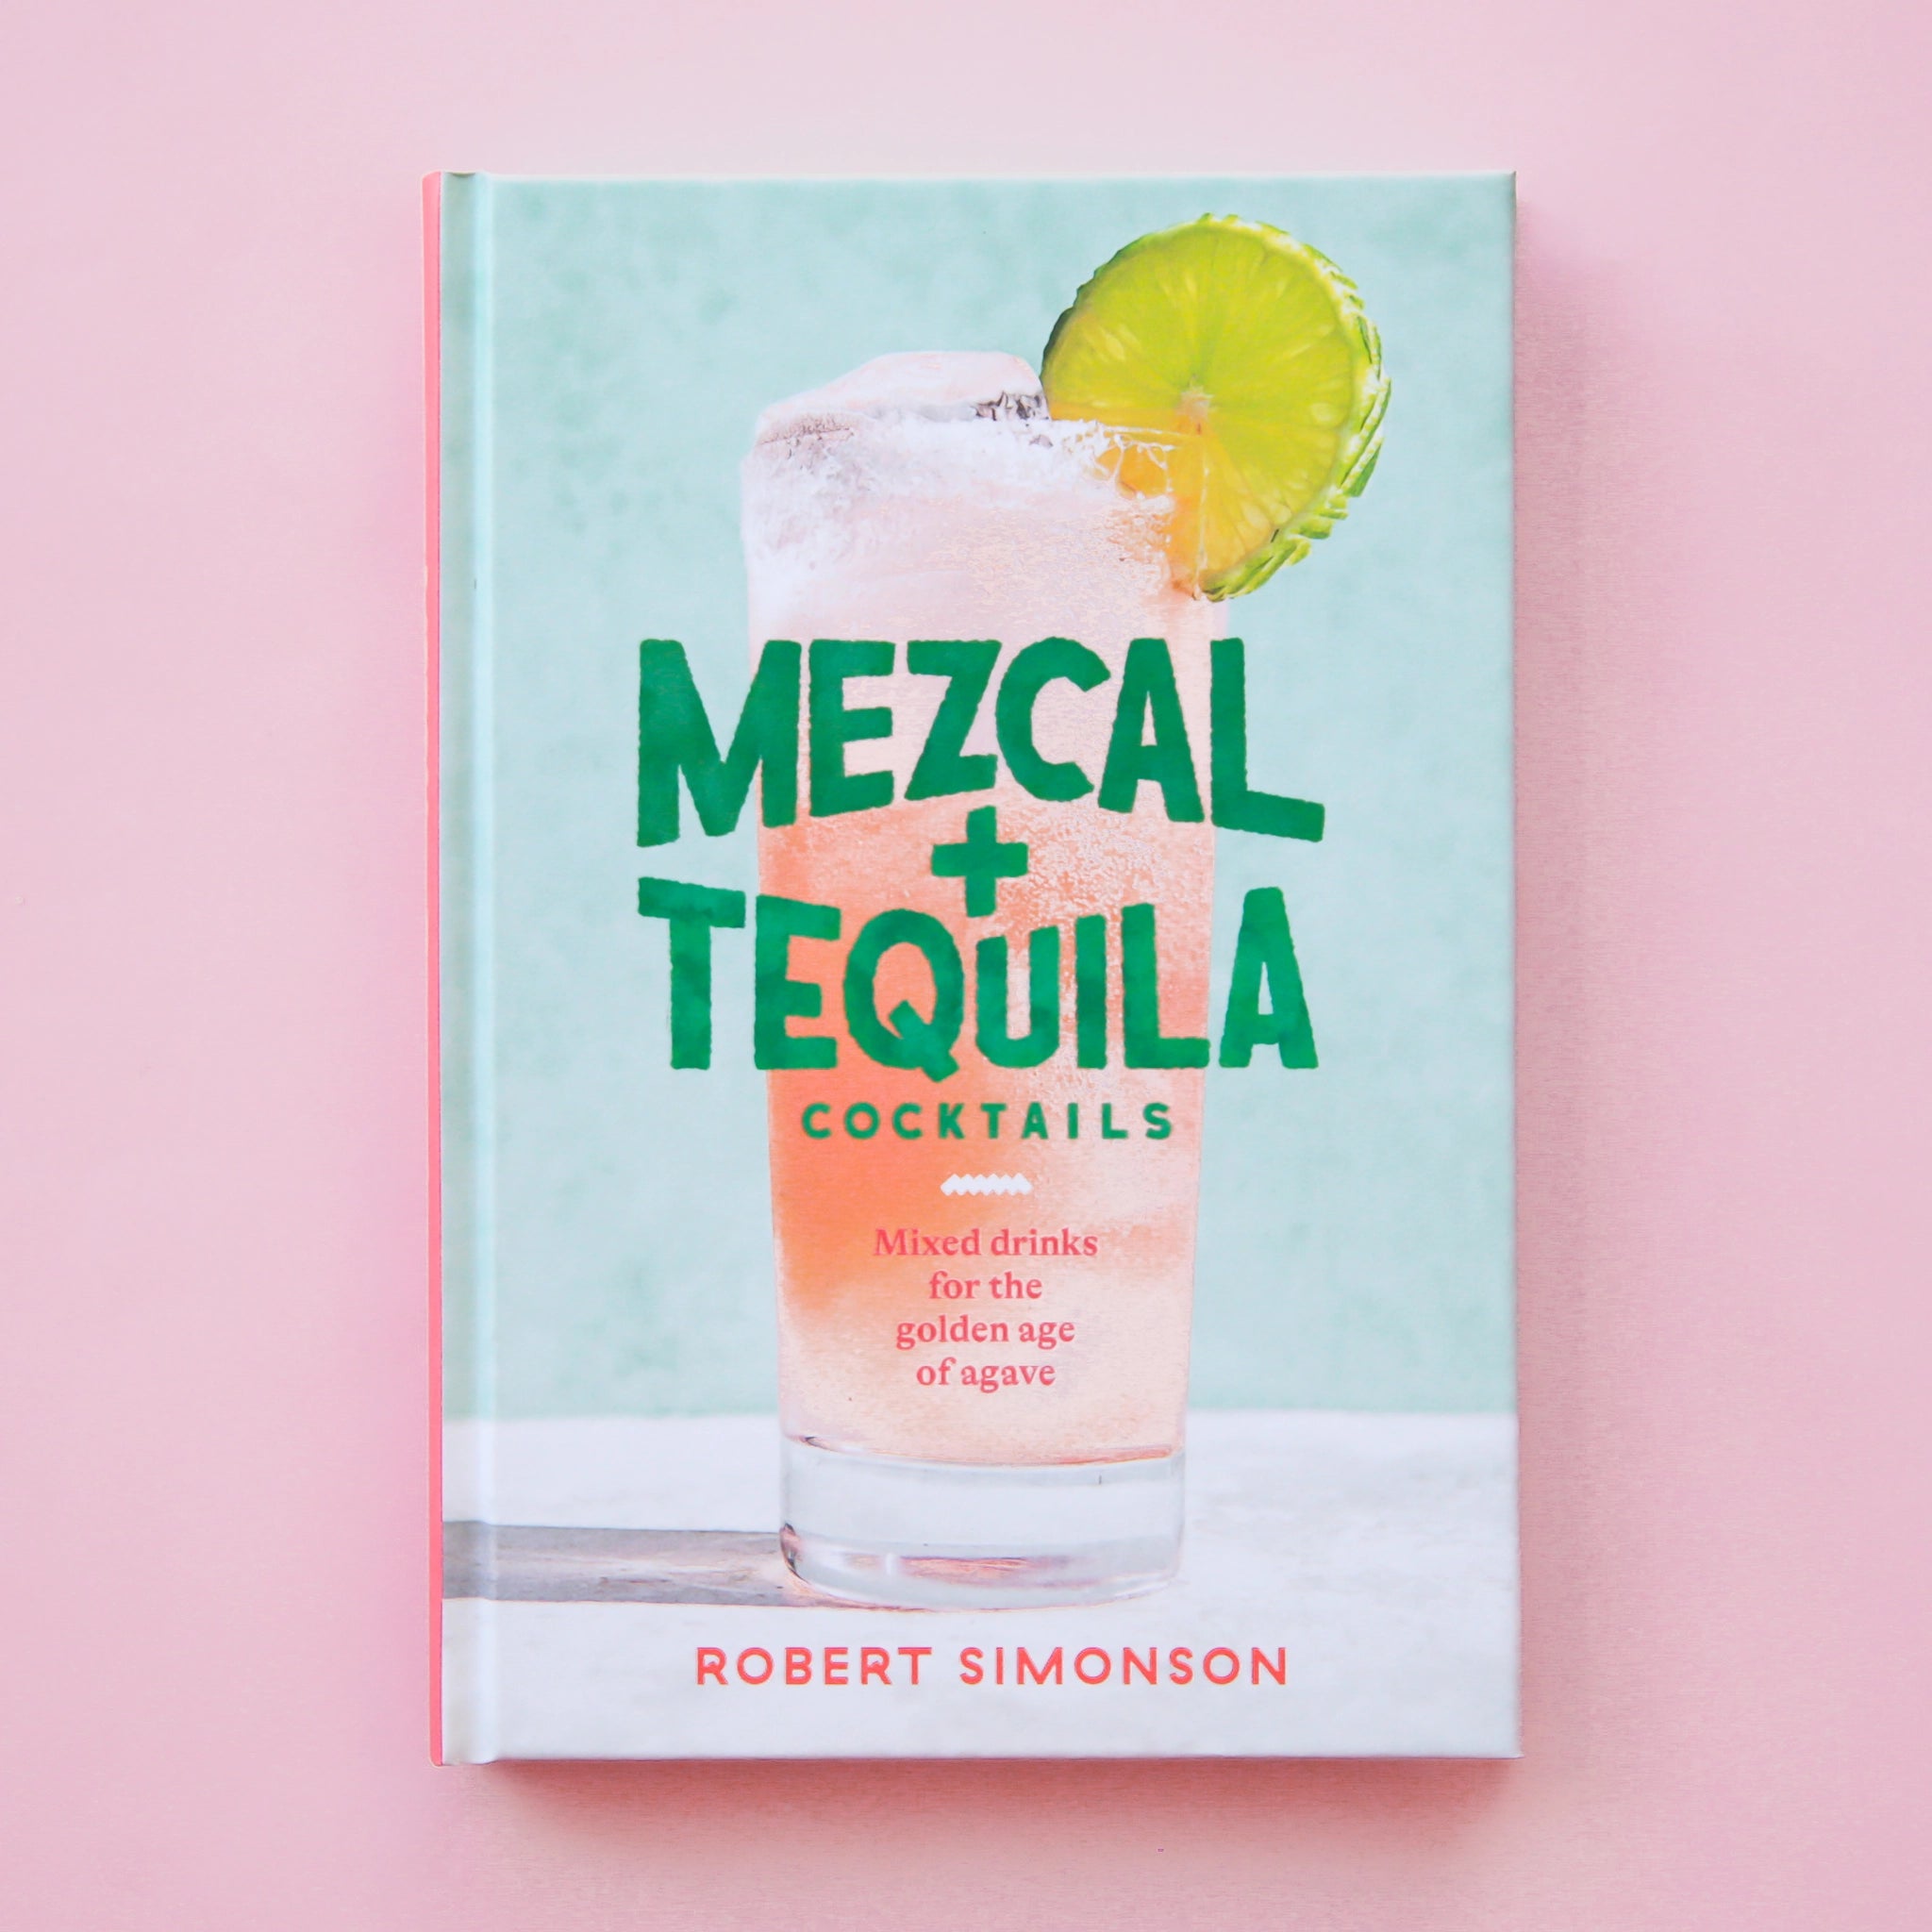 A light blue book cover with a pink tropical cocktail on the front with the title, "Mezcal + Tequila Cocktails" in teal blue lettering.